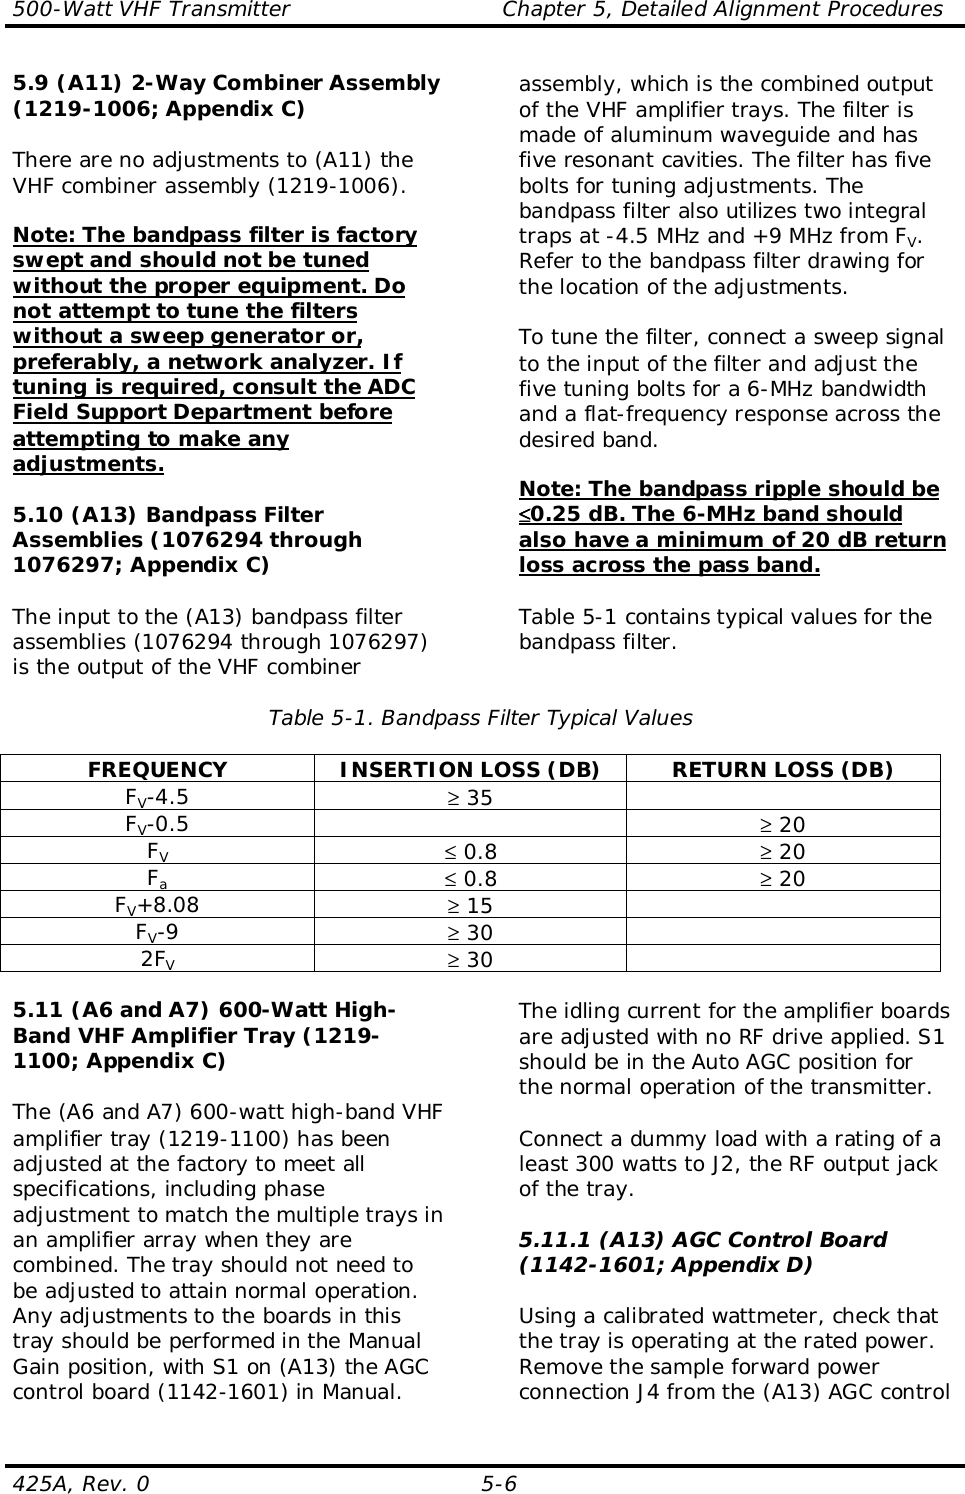 500-Watt VHF Transmitter                             Chapter 5, Detailed Alignment Procedures425A, Rev. 0 5-65.9 (A11) 2-Way Combiner Assembly(1219-1006; Appendix C)There are no adjustments to (A11) theVHF combiner assembly (1219-1006).Note: The bandpass filter is factoryswept and should not be tunedwithout the proper equipment. Donot attempt to tune the filterswithout a sweep generator or,preferably, a network analyzer. Iftuning is required, consult the ADCField Support Department beforeattempting to make anyadjustments.5.10 (A13) Bandpass FilterAssemblies (1076294 through1076297; Appendix C)The input to the (A13) bandpass filterassemblies (1076294 through 1076297)is the output of the VHF combinerassembly, which is the combined outputof the VHF amplifier trays. The filter ismade of aluminum waveguide and hasfive resonant cavities. The filter has fivebolts for tuning adjustments. Thebandpass filter also utilizes two integraltraps at -4.5 MHz and +9 MHz from FV.Refer to the bandpass filter drawing forthe location of the adjustments.To tune the filter, connect a sweep signalto the input of the filter and adjust thefive tuning bolts for a 6-MHz bandwidthand a flat-frequency response across thedesired band.Note: The bandpass ripple should be≤≤≤≤0.25 dB. The 6-MHz band shouldalso have a minimum of 20 dB returnloss across the pass band.Table 5-1 contains typical values for thebandpass filter.Table 5-1. Bandpass Filter Typical ValuesFREQUENCY INSERTION LOSS (DB) RETURN LOSS (DB)FV-4.5 ≥ 35FV-0.5 ≥ 20FV≤ 0.8 ≥ 20Fa≤ 0.8 ≥ 20FV+8.08 ≥ 15FV-9 ≥ 302FV≥ 305.11 (A6 and A7) 600-Watt High-Band VHF Amplifier Tray (1219-1100; Appendix C)The (A6 and A7) 600-watt high-band VHFamplifier tray (1219-1100) has beenadjusted at the factory to meet allspecifications, including phaseadjustment to match the multiple trays inan amplifier array when they arecombined. The tray should not need tobe adjusted to attain normal operation.Any adjustments to the boards in thistray should be performed in the ManualGain position, with S1 on (A13) the AGCcontrol board (1142-1601) in Manual.The idling current for the amplifier boardsare adjusted with no RF drive applied. S1should be in the Auto AGC position forthe normal operation of the transmitter.Connect a dummy load with a rating of aleast 300 watts to J2, the RF output jackof the tray.5.11.1 (A13) AGC Control Board(1142-1601; Appendix D)Using a calibrated wattmeter, check thatthe tray is operating at the rated power.Remove the sample forward powerconnection J4 from the (A13) AGC control